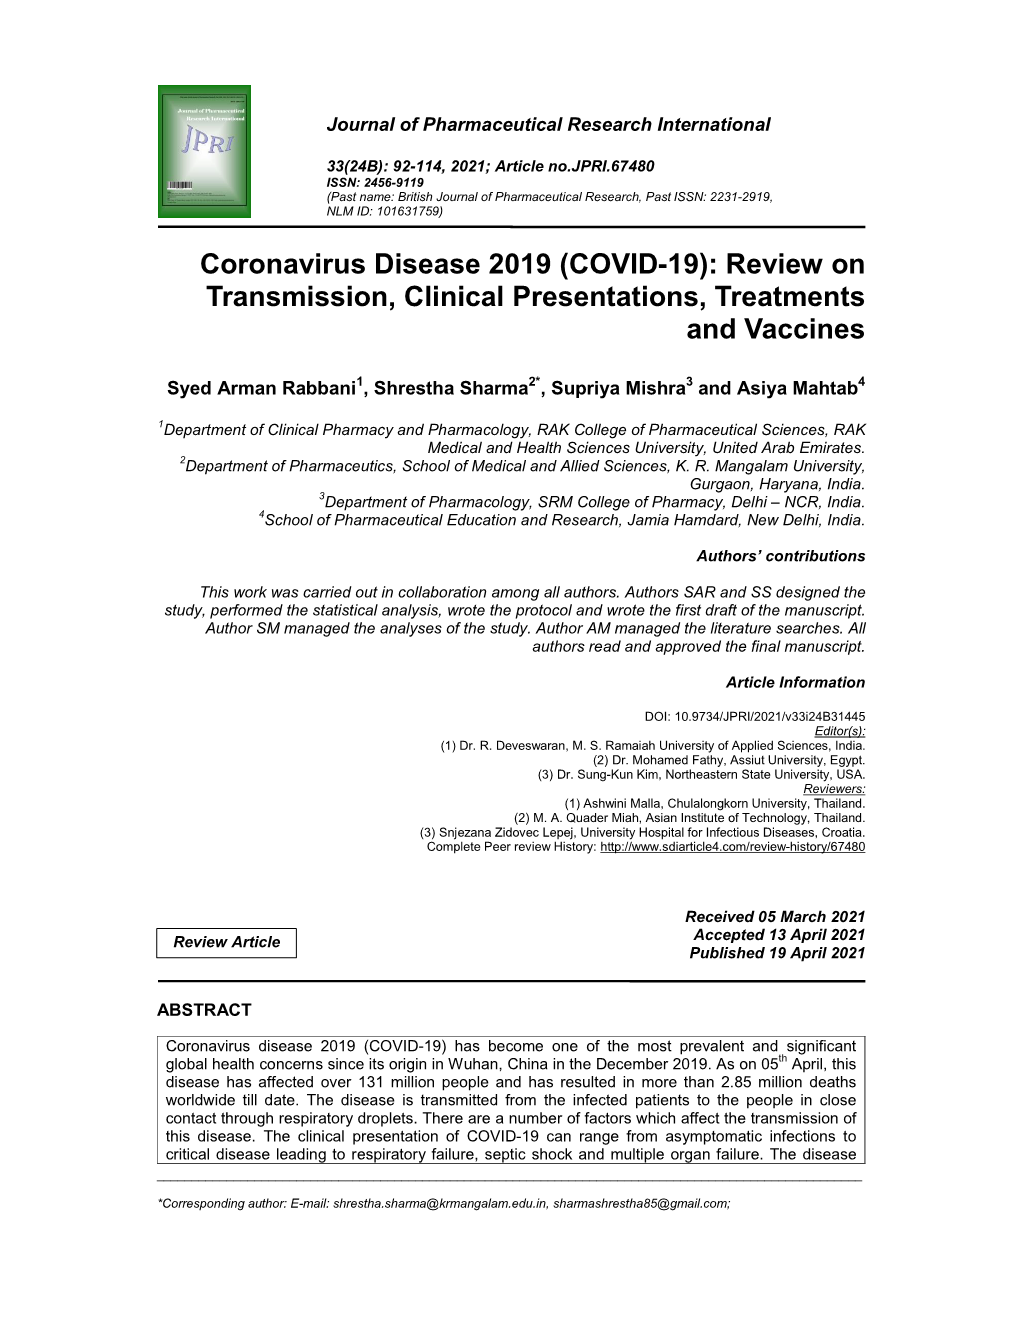 COVID-19): Review on Transmission, Clinical Presentations, Treatments and Vaccines